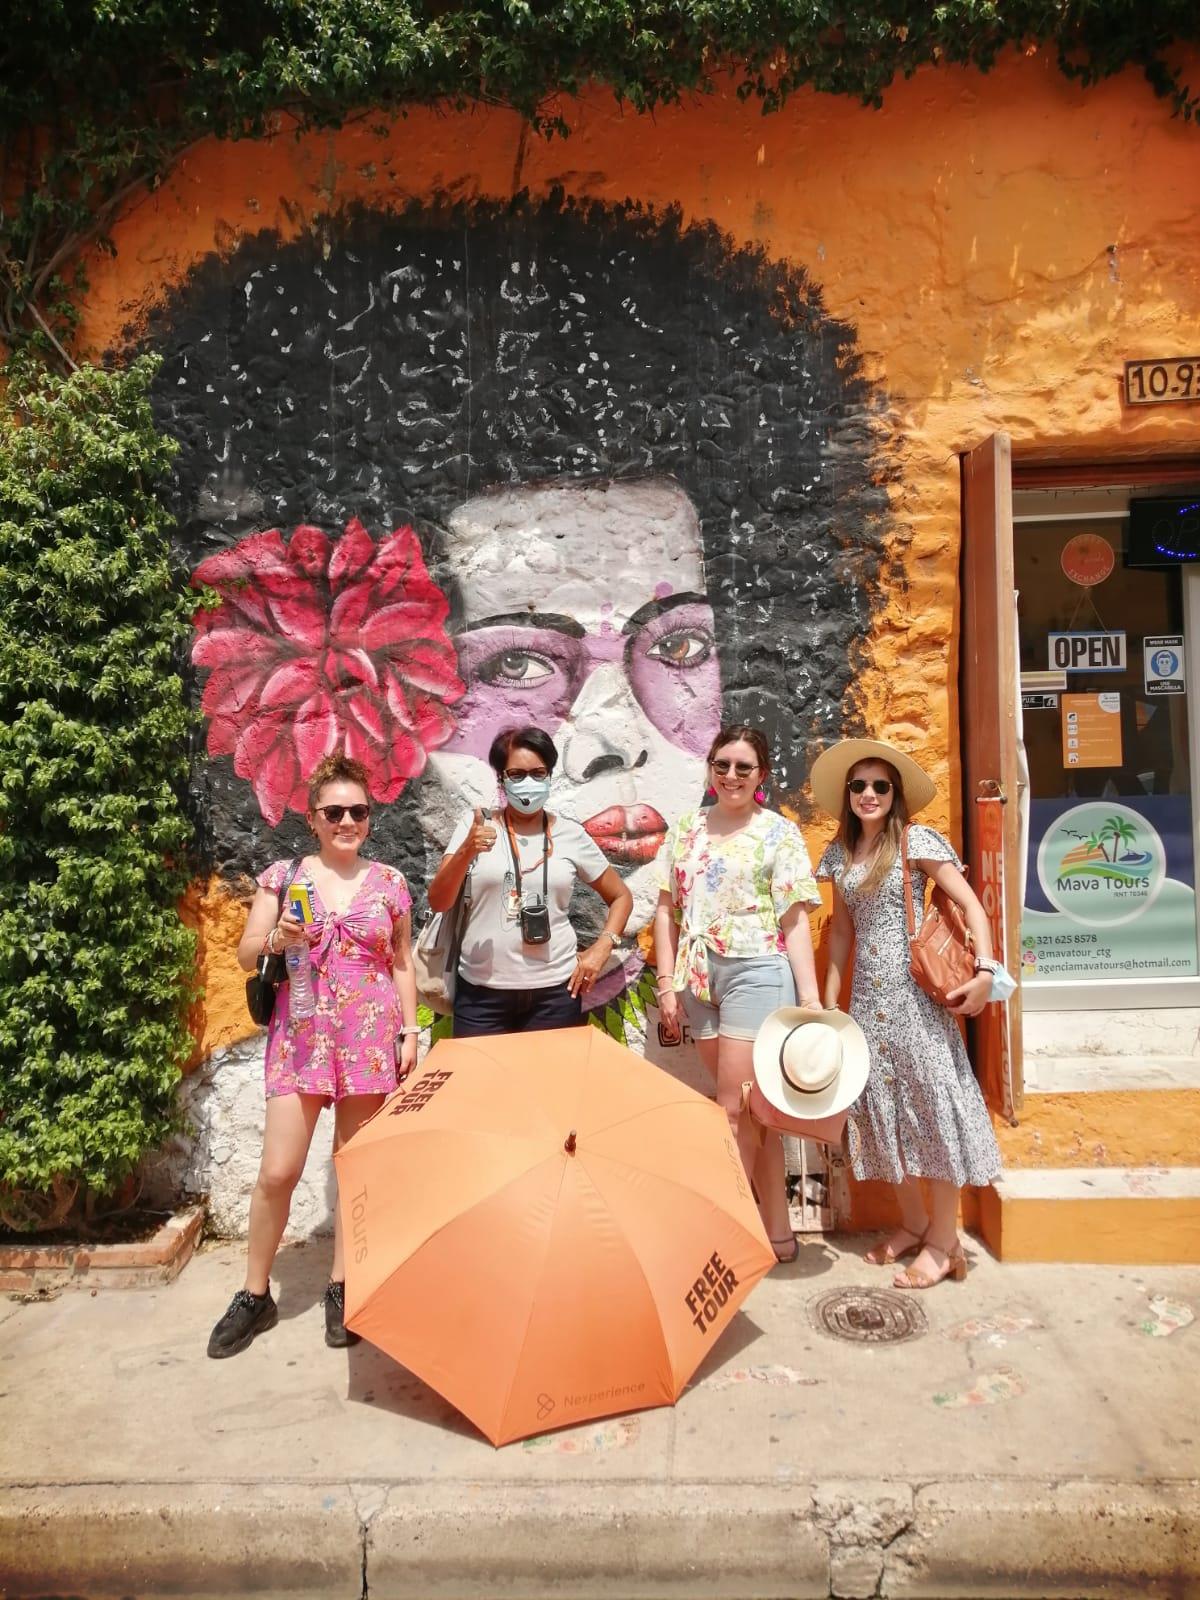 Free-Tour-HISTORIC-CARTAGENA-AND-GETSEMANI:-2-in-1-10